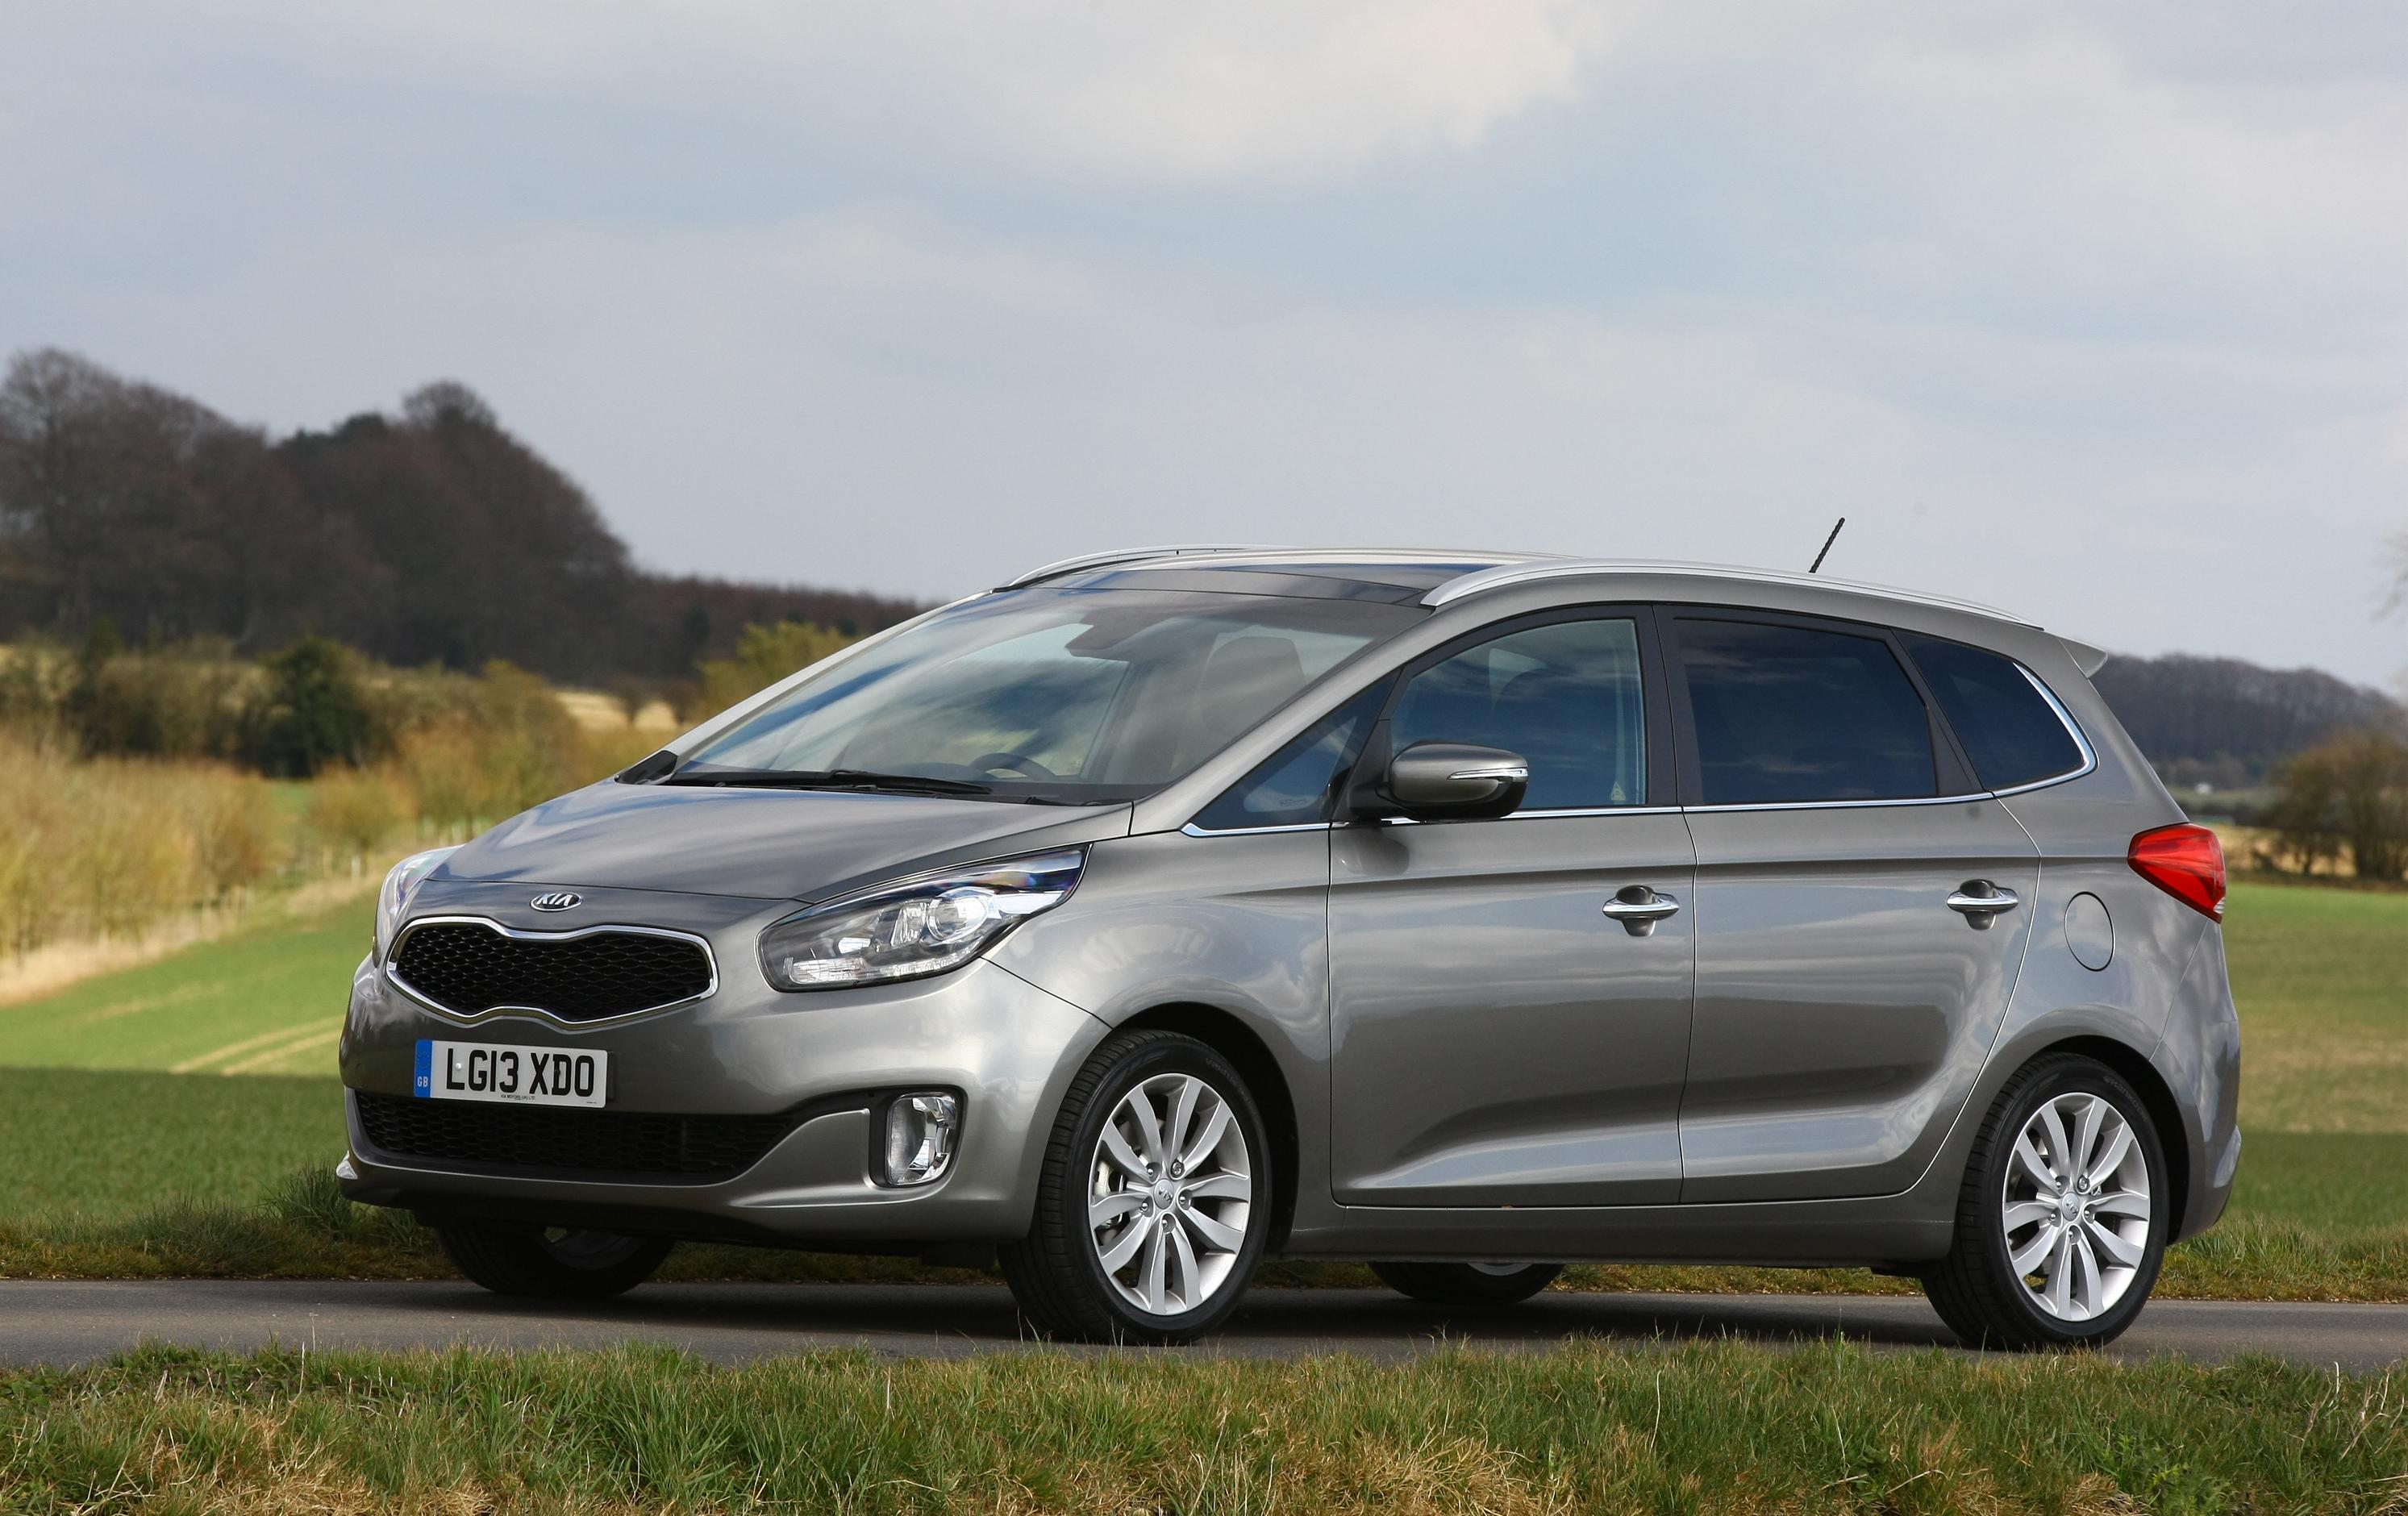 A grey Kia Carens with a field in the background